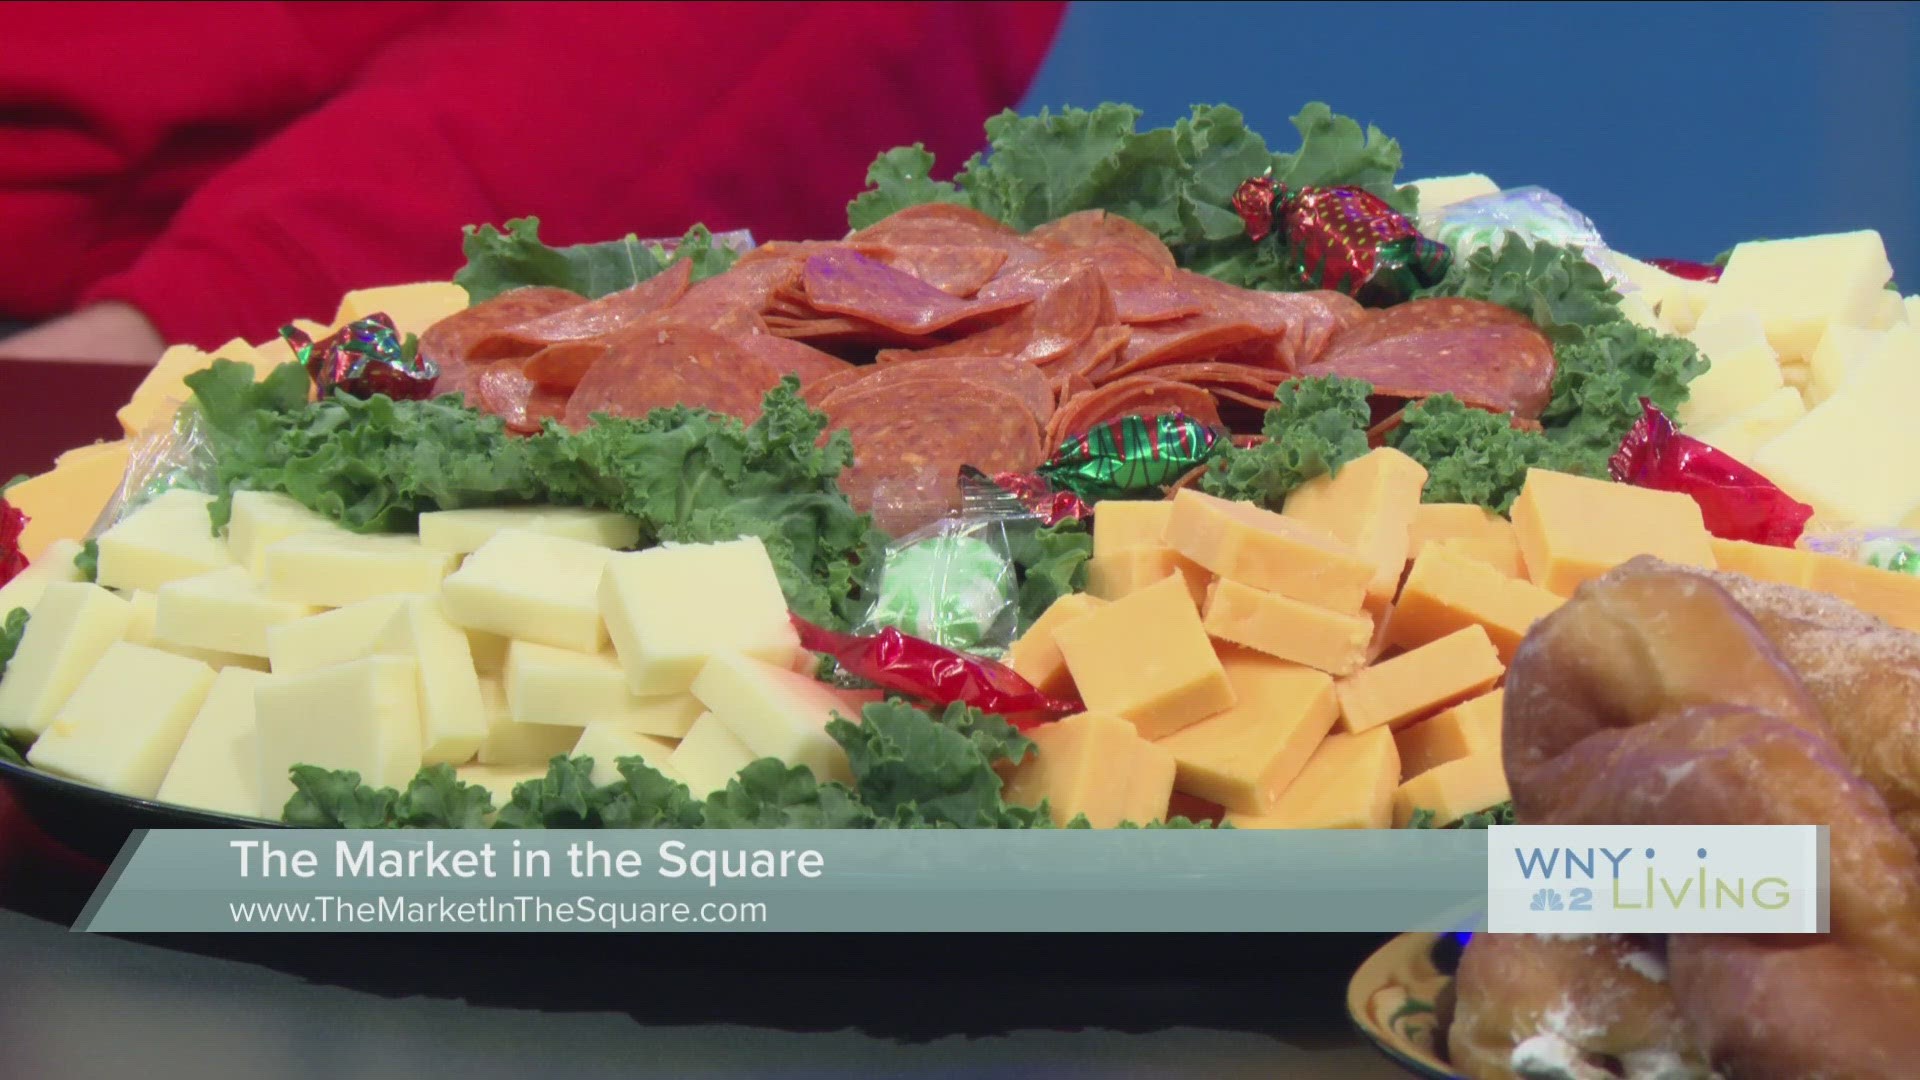 WNY Living - December 30 - The Market in the Square (THIS VIDEO IS SPONSORED BY THE MARKET IN THE SQUARE)